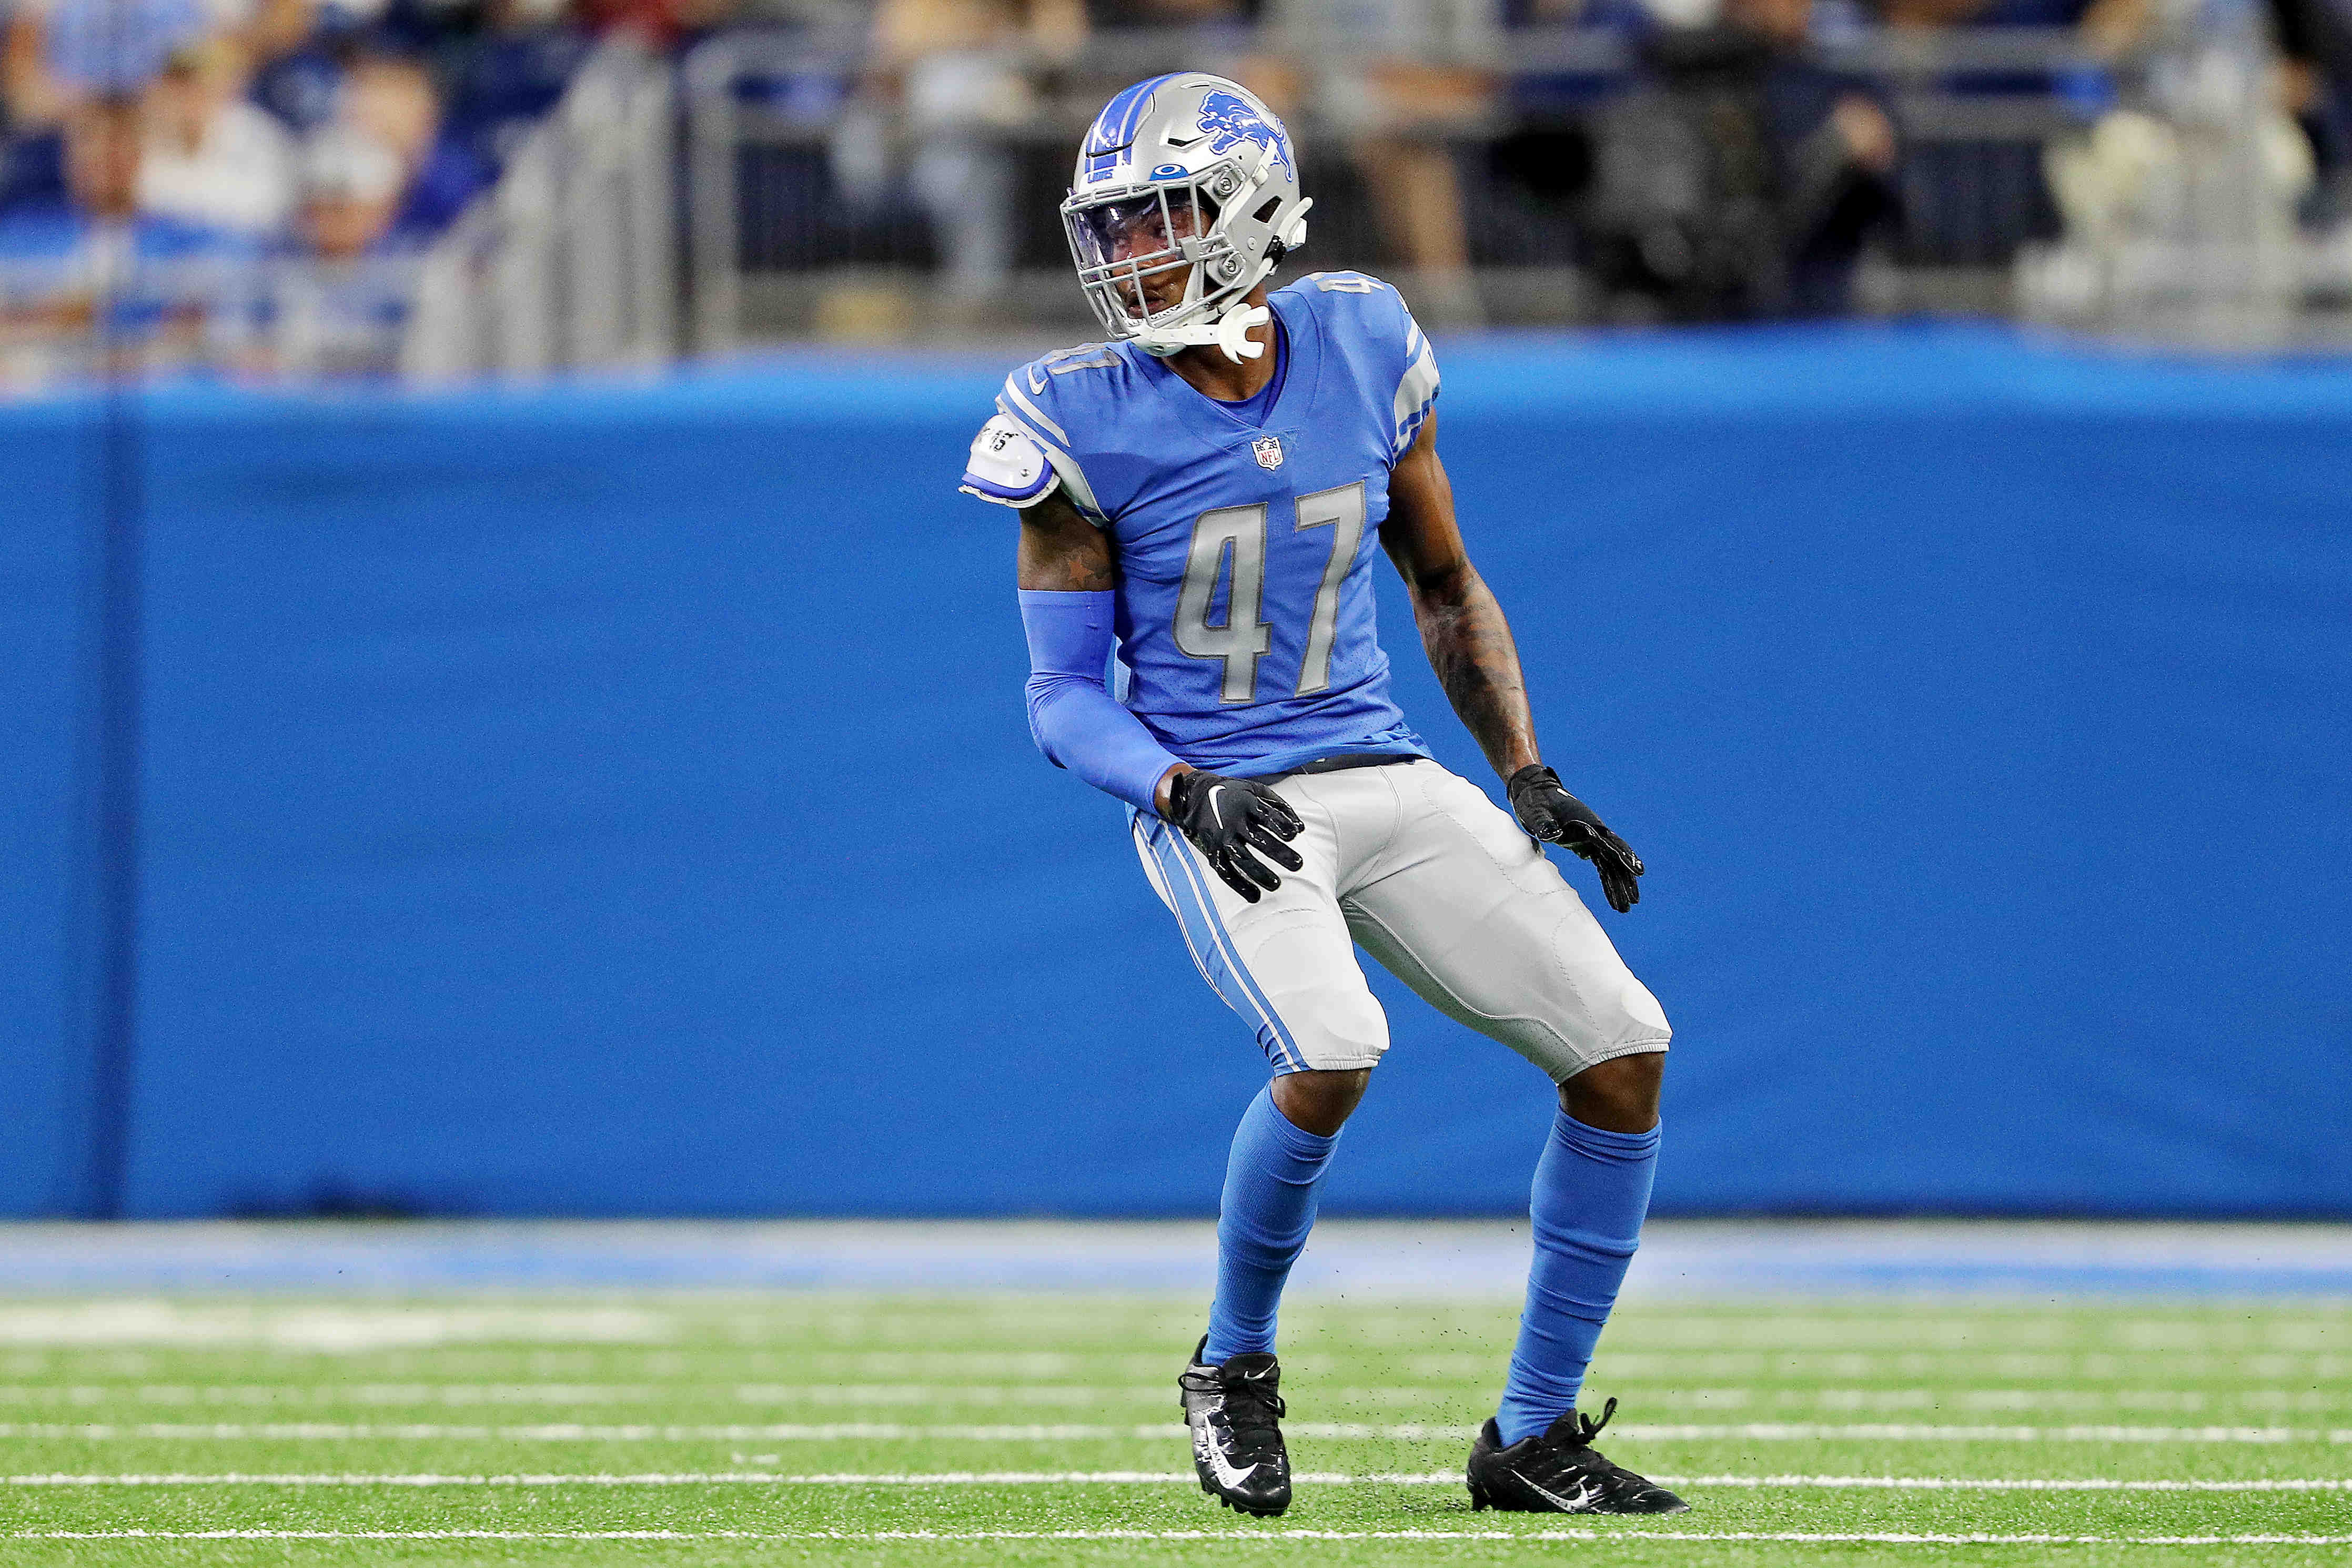 Detroit Lions roster cut tracker: Jahlani Tavai, Mike Ford waived